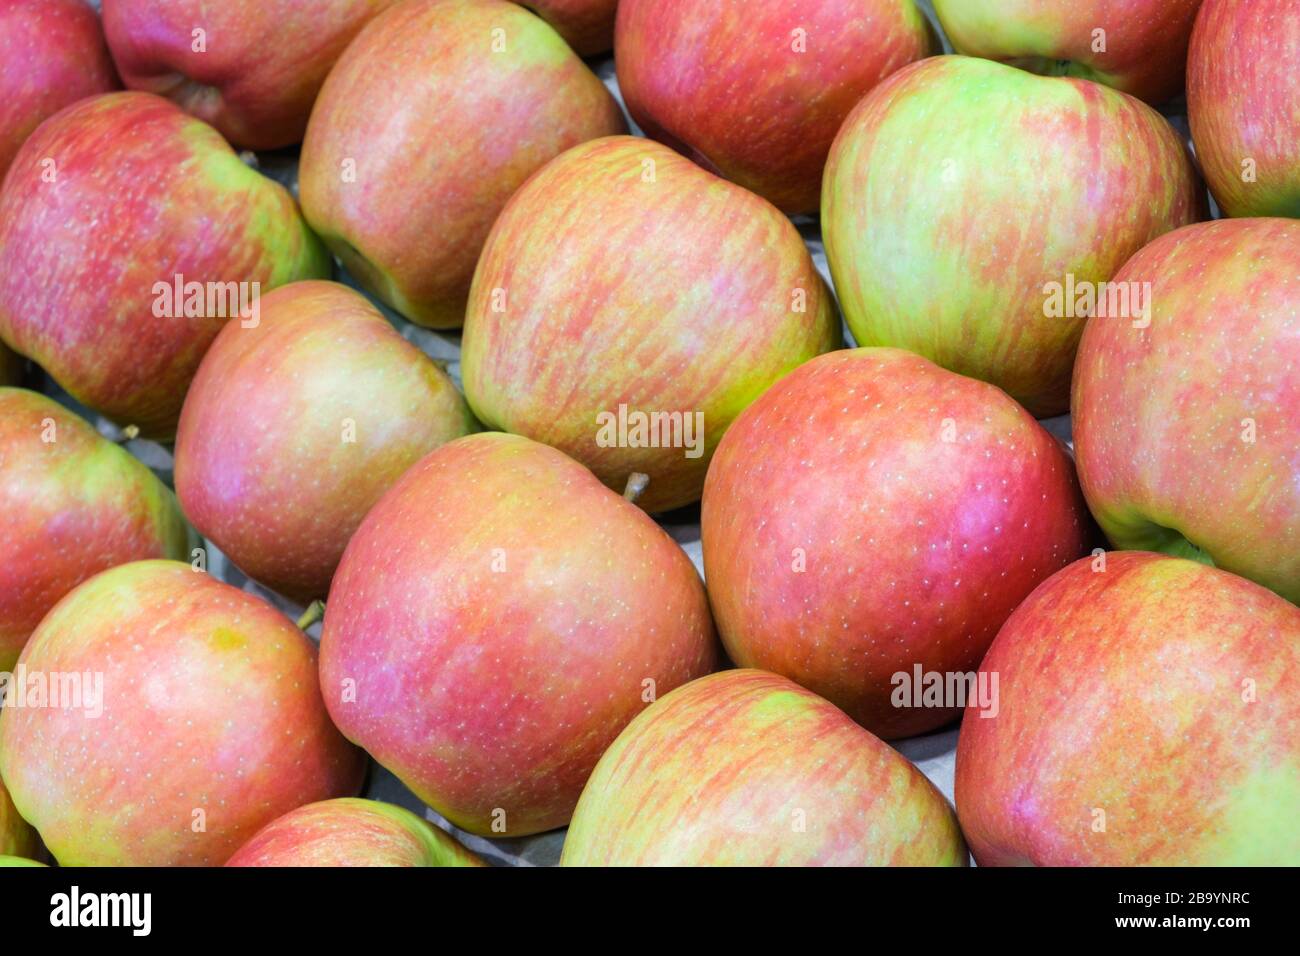 Web banner red apples background Stock Photo